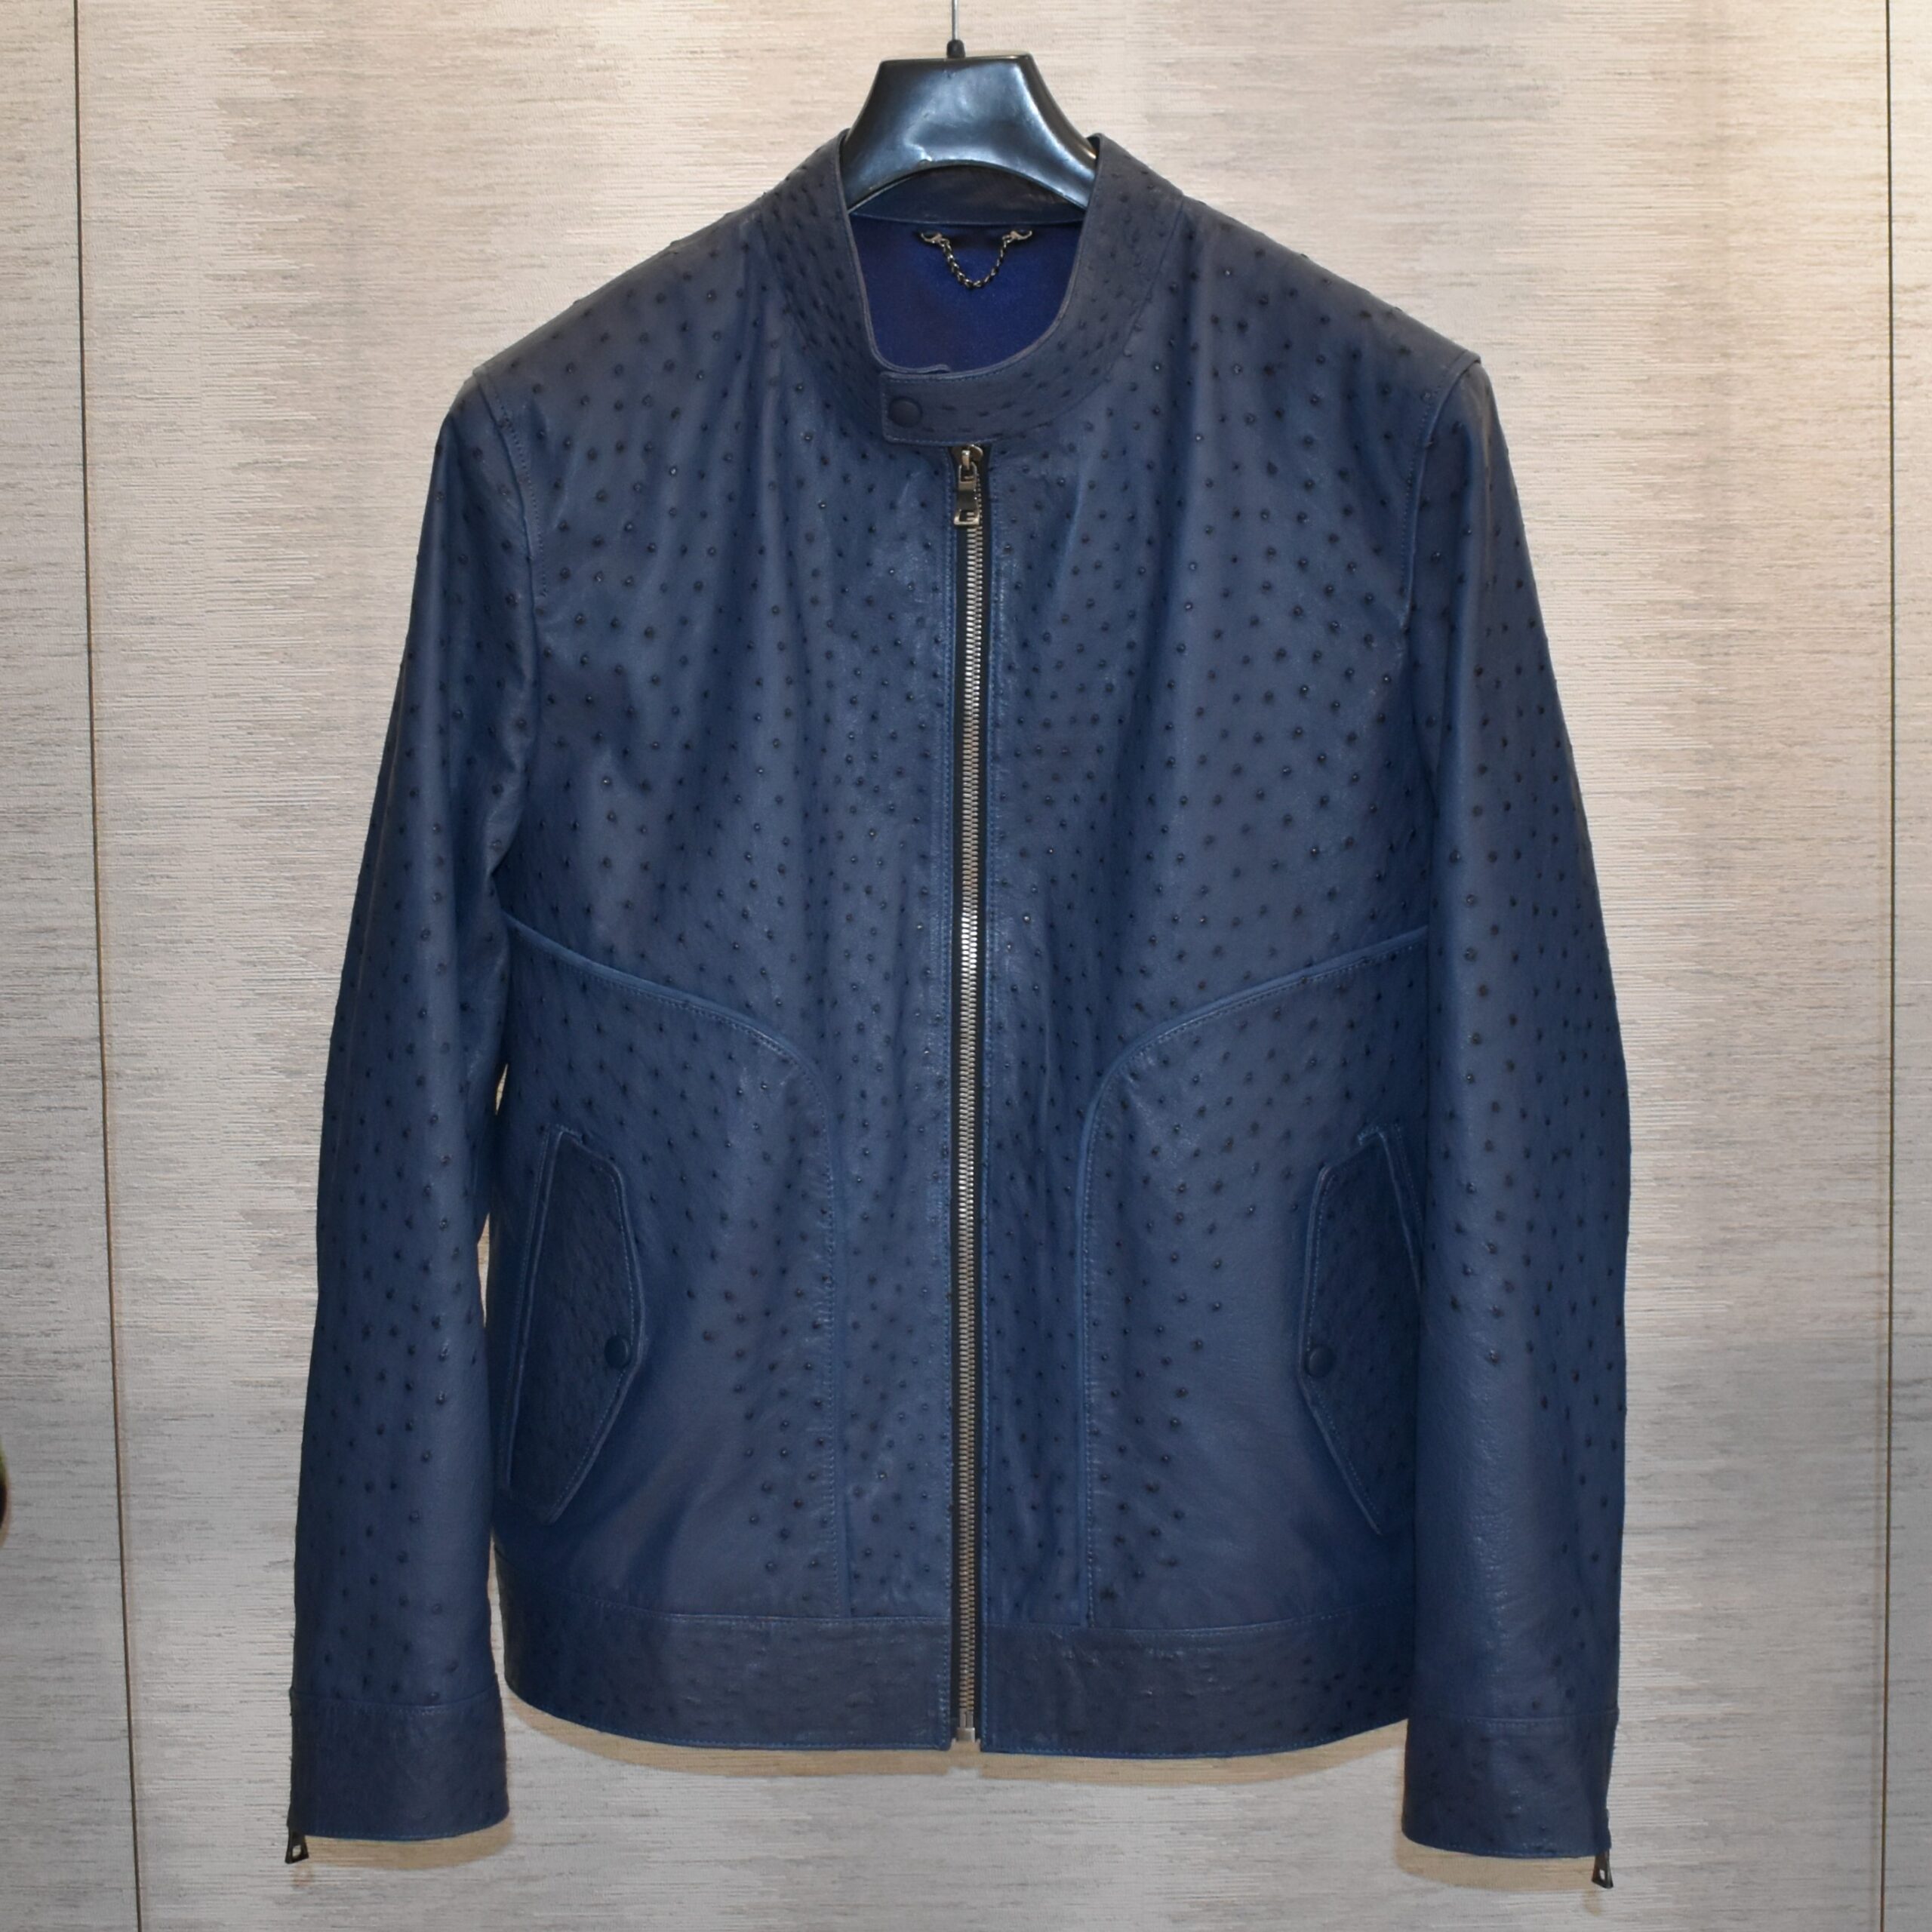 Navy Blue Ostrich Leather Jacket - Leather Guys: Luxury Leather jackets